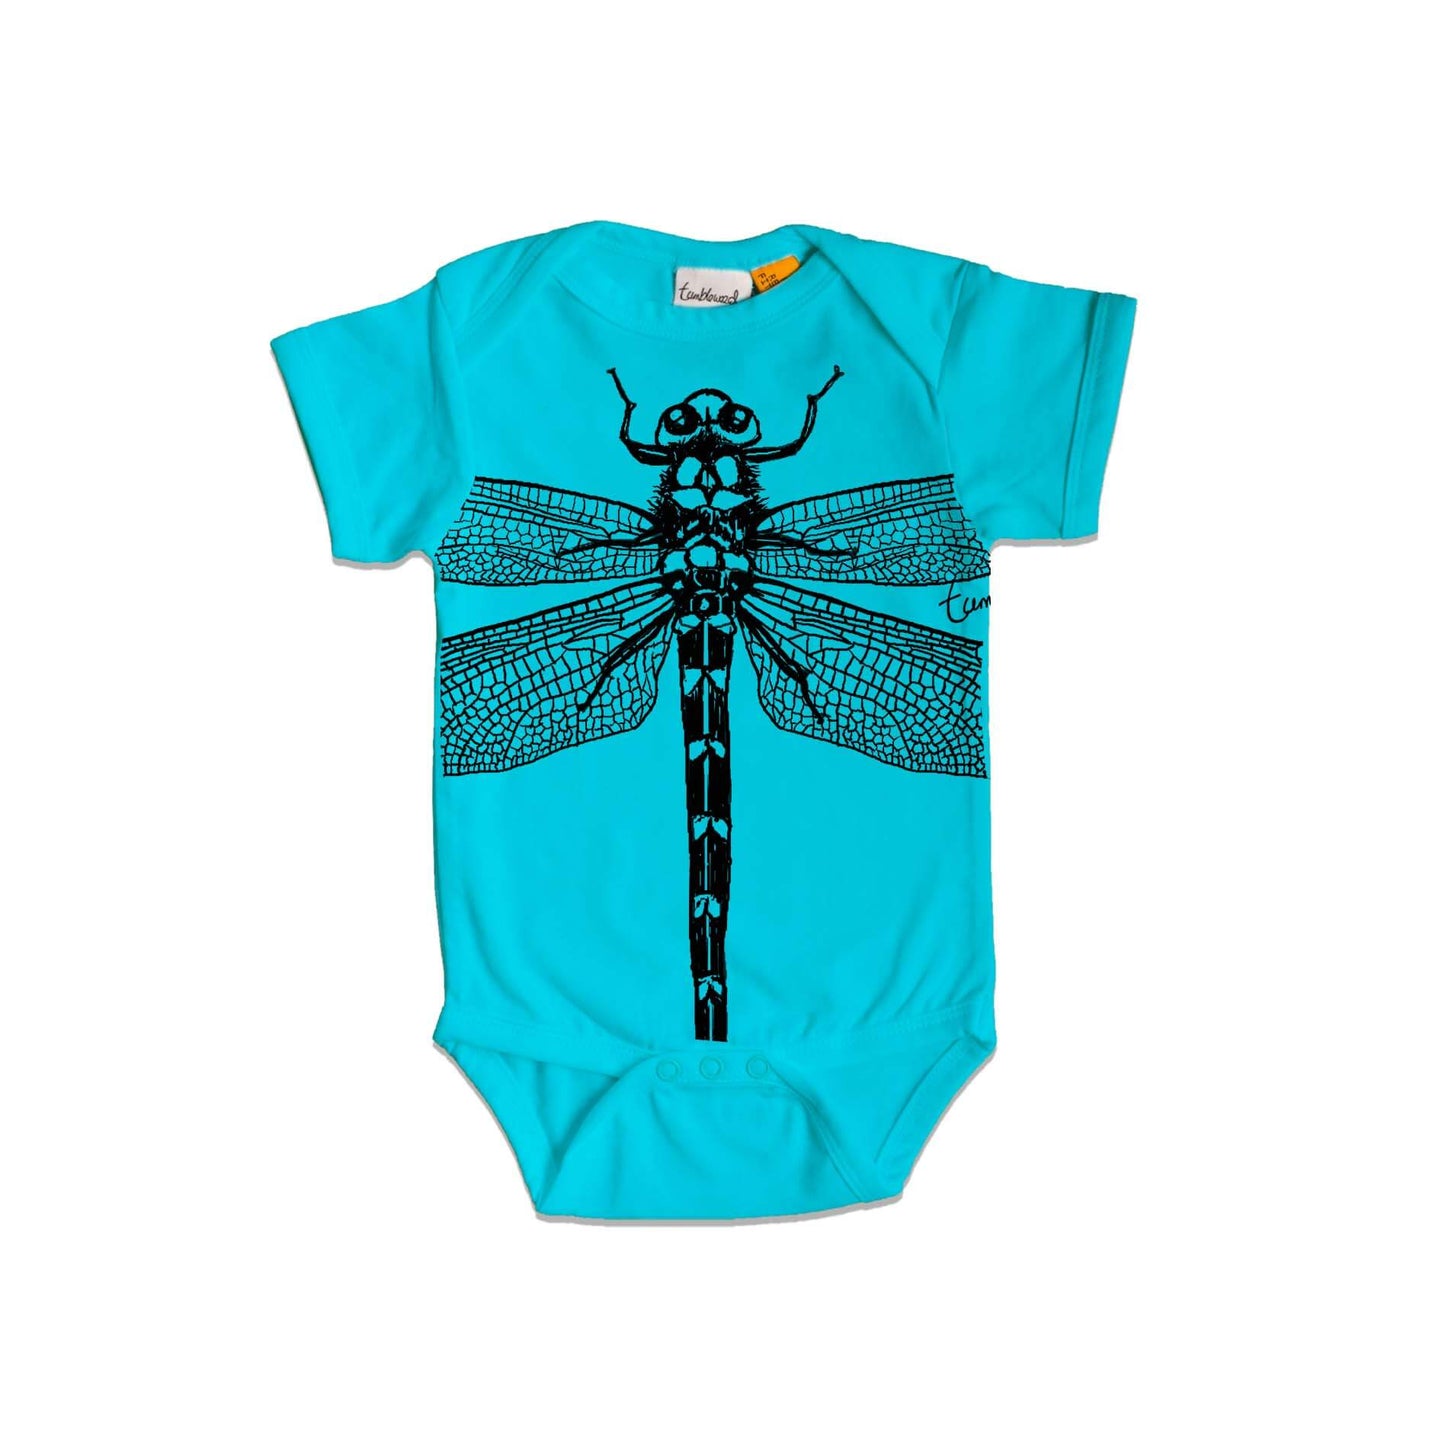 Short sleeved, blue, organic cotton, baby onesie featuring a screen printed Dragonfly design.
 design.